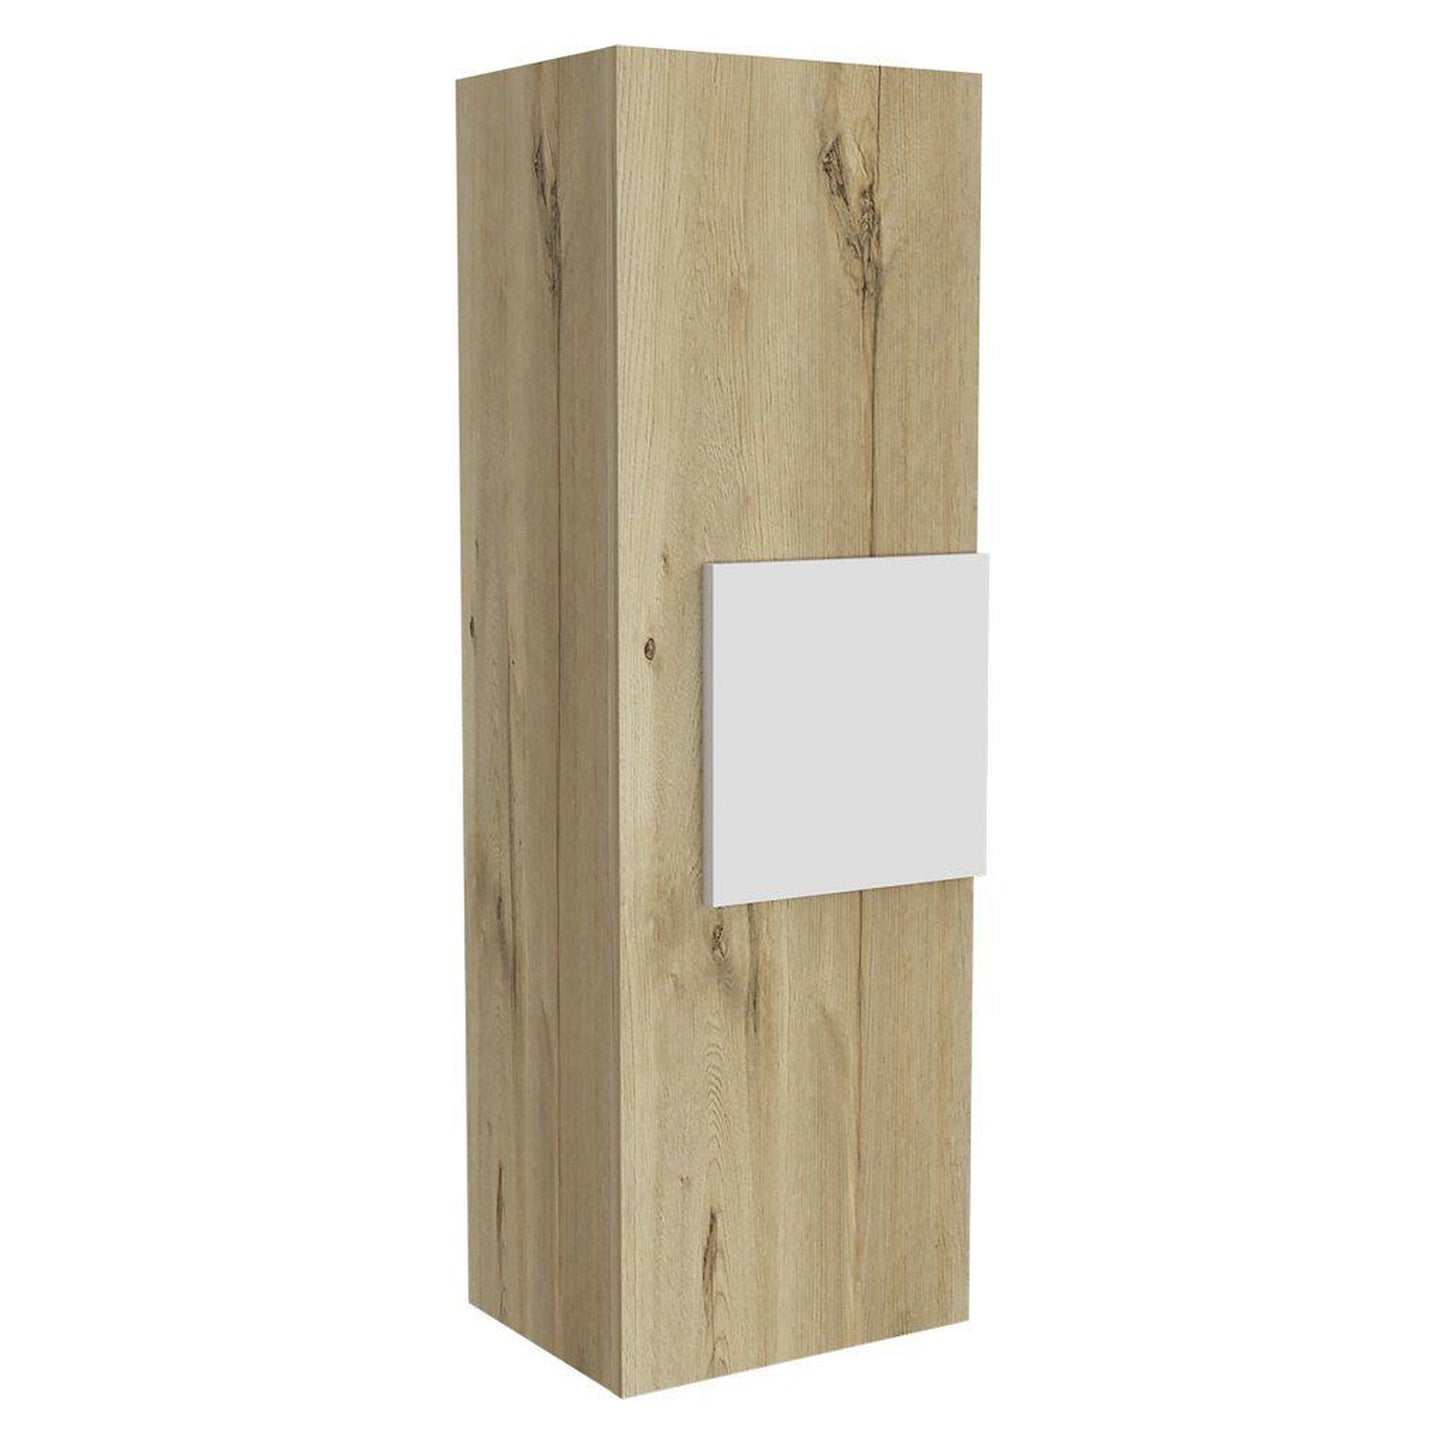 TUHOME Vanguard 38" Light Oak Wall-Mounted Cabinet With White Center Panel